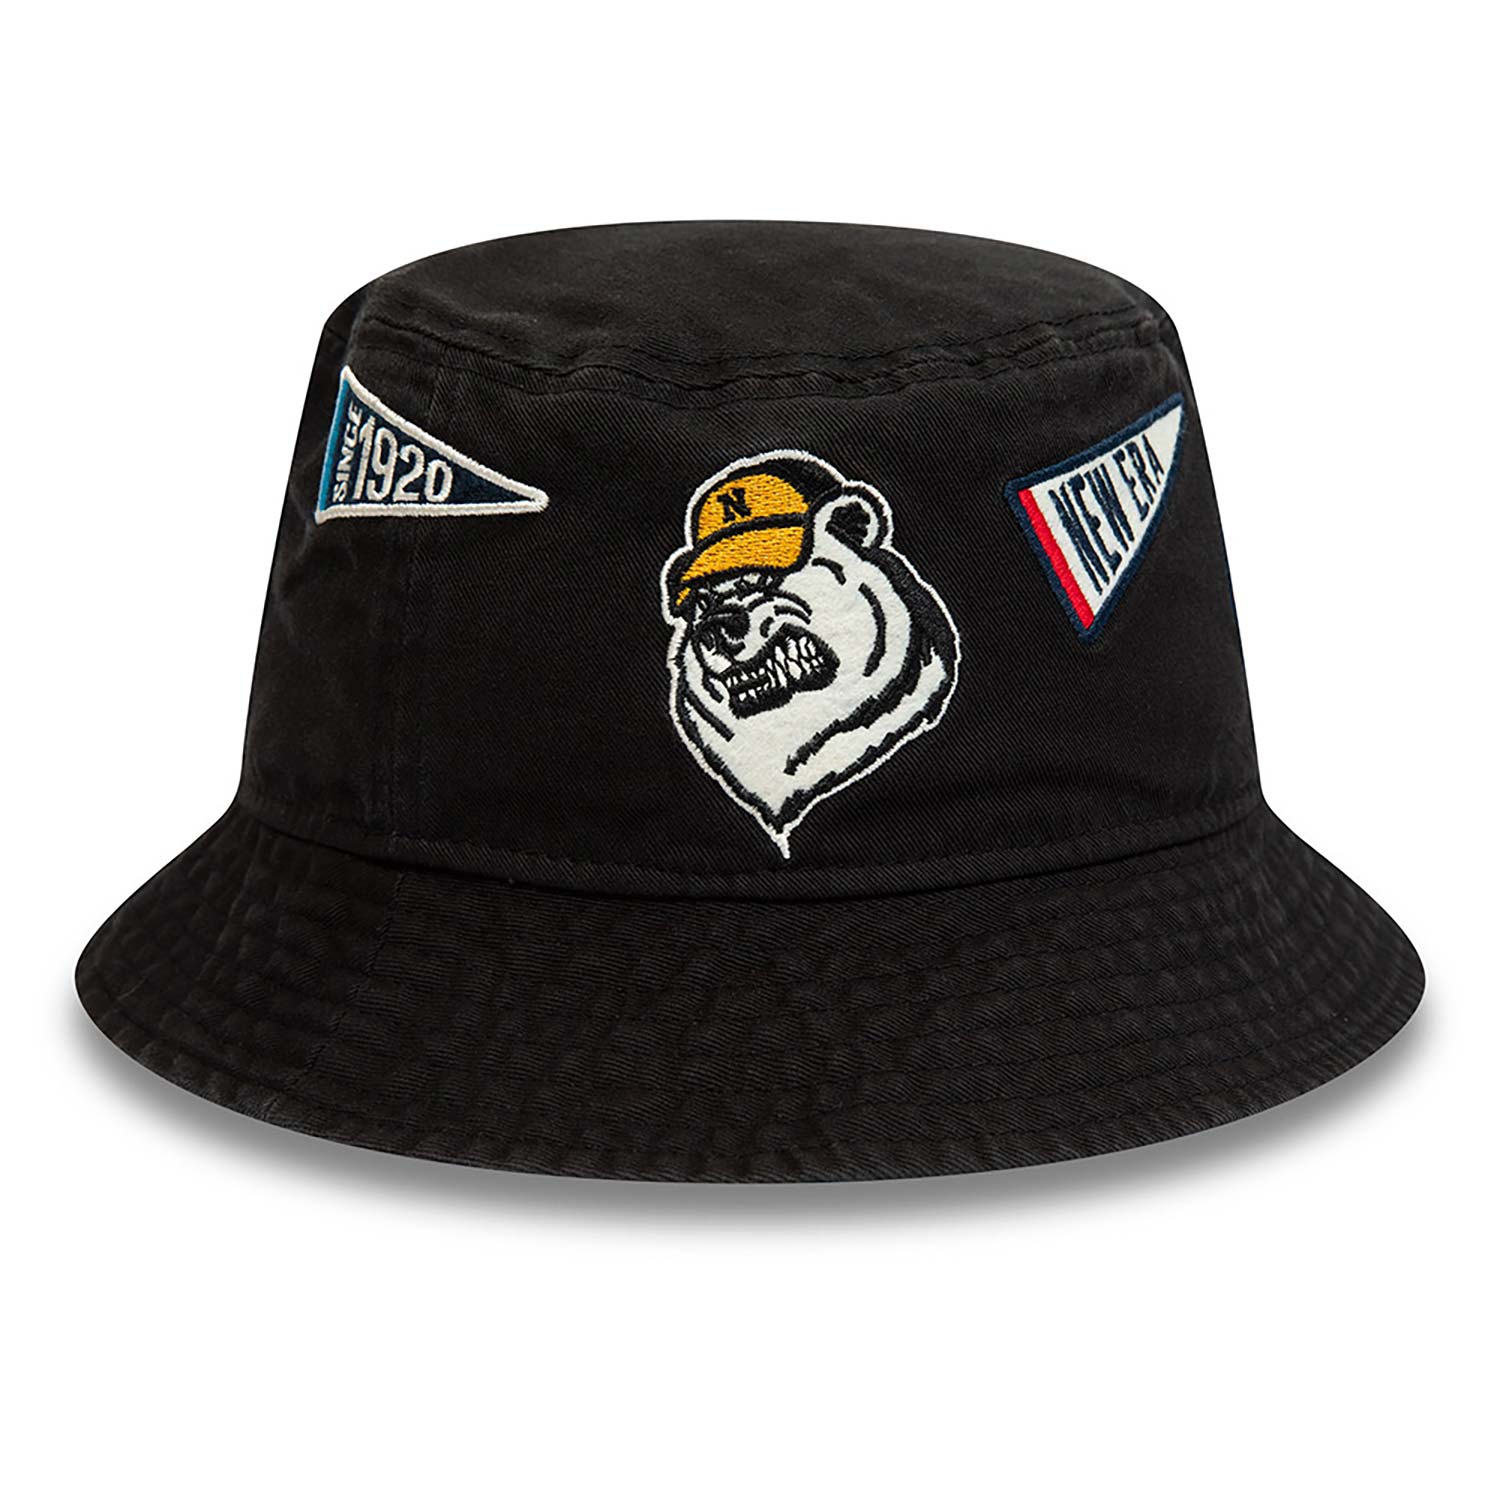 New Era Heritage All Over Patch Black Bucket Hat